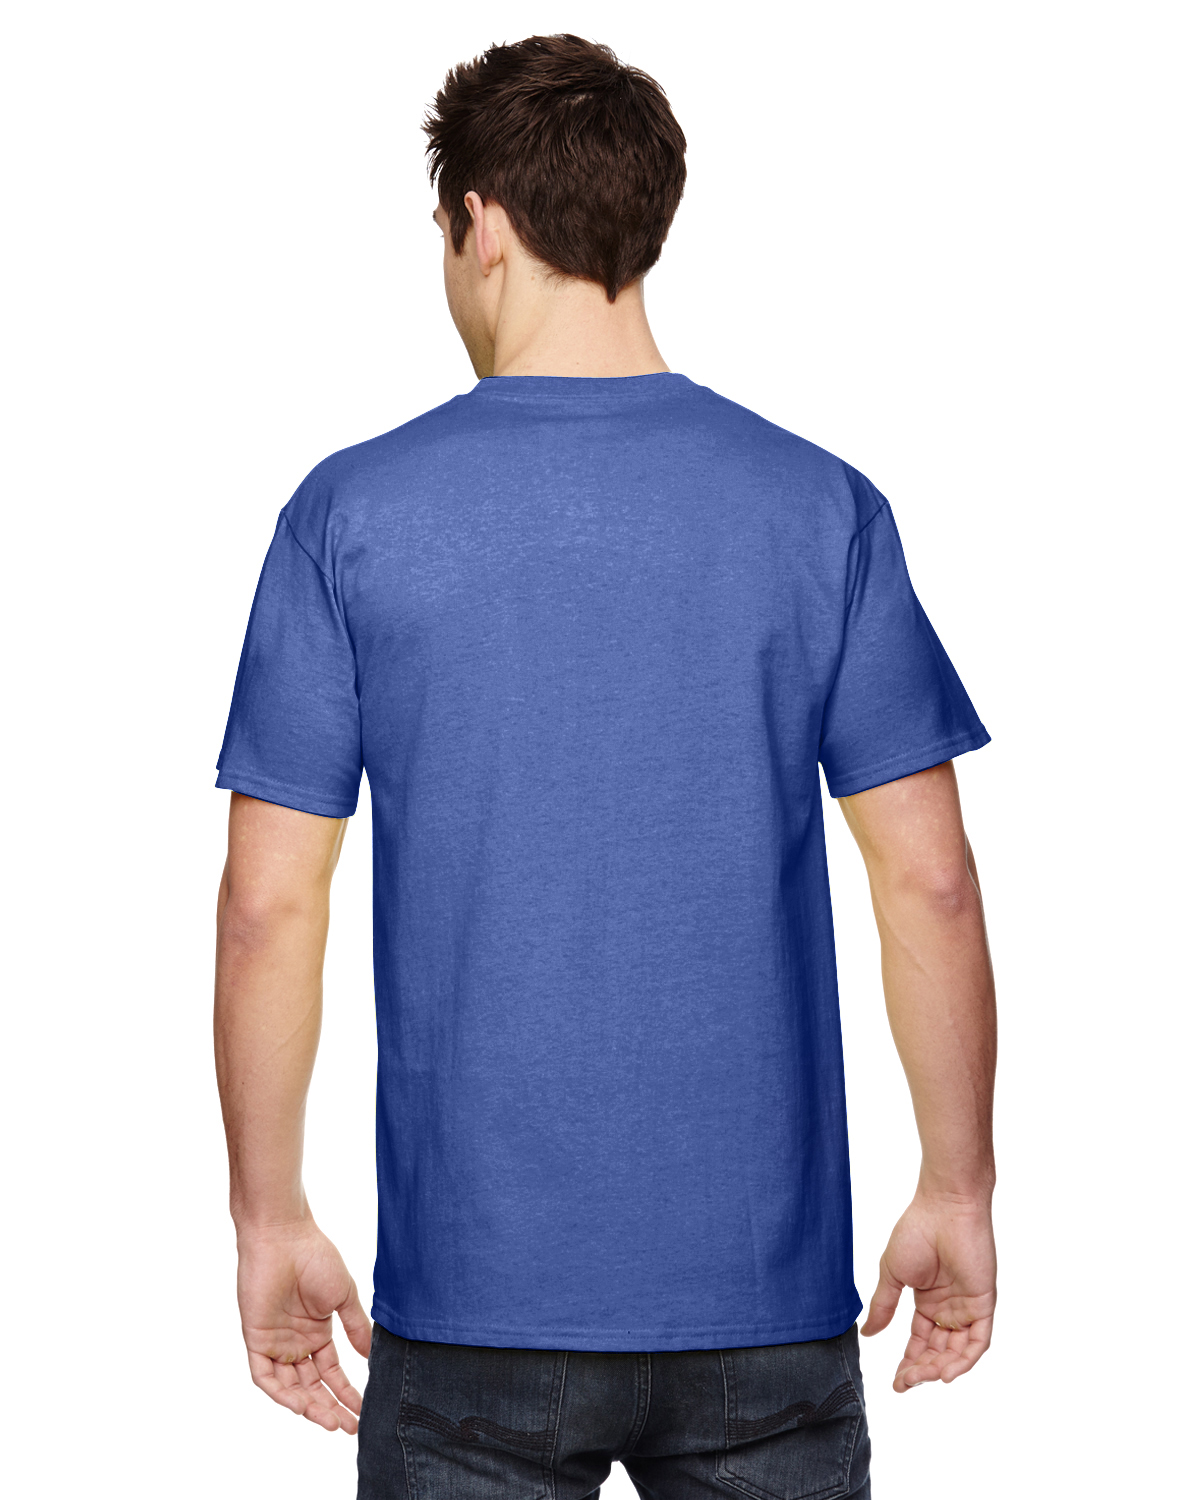 Fruit of the Loom HD Cotton - 3931 T Shirts at Wholesale Prices